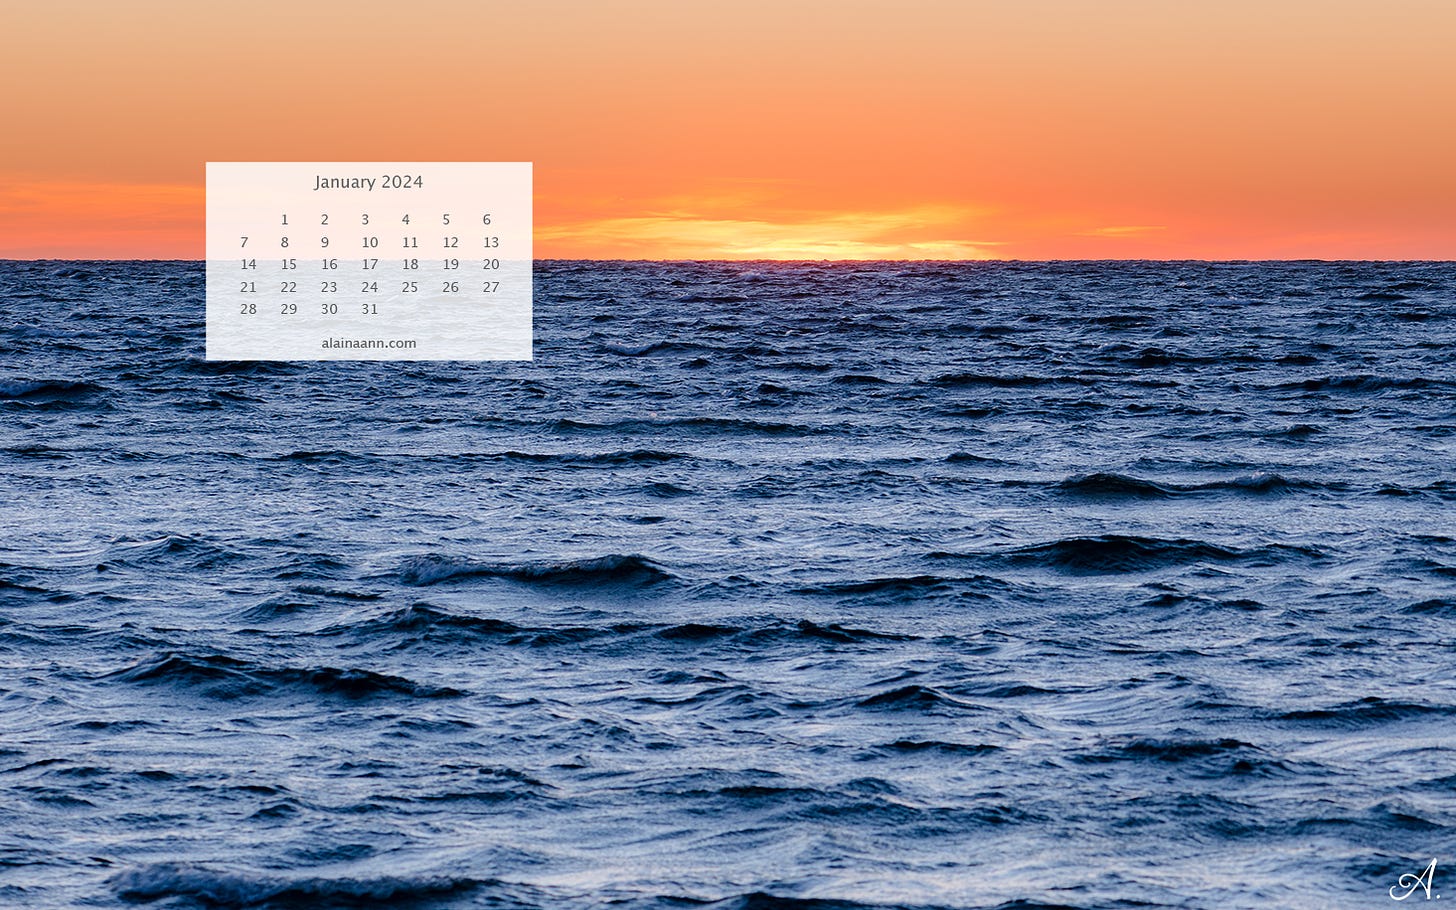 Choppy blue water with a blue sunset sky above. A white box with a January 2024 calendar is in the upper left corner.